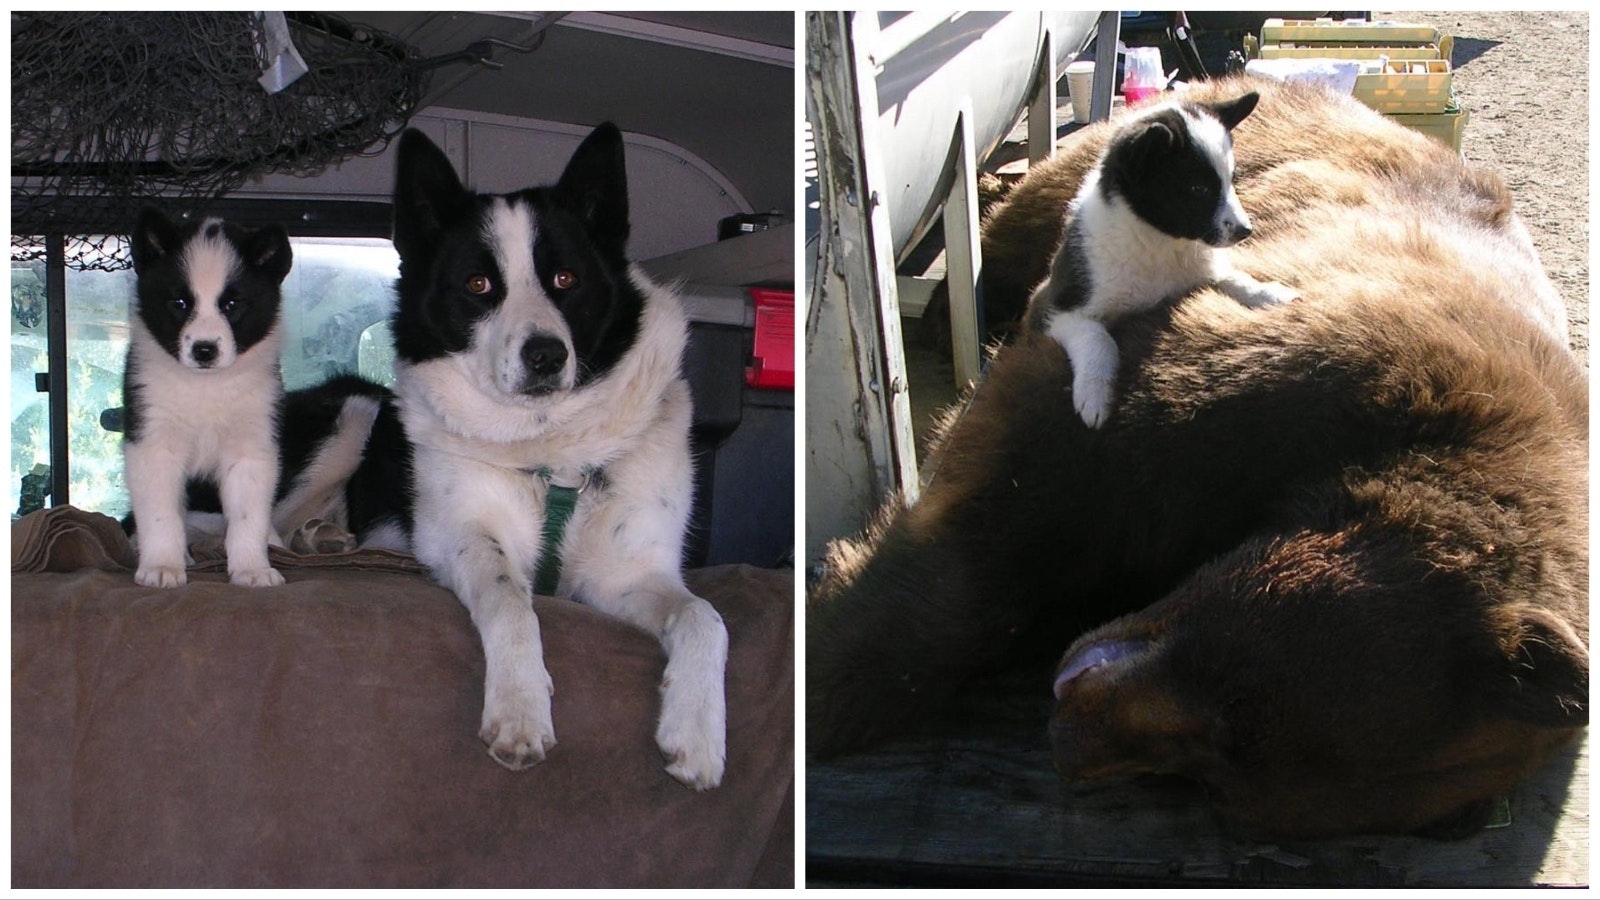 A Karelian bear dog and a pup, along with a downed bruin.